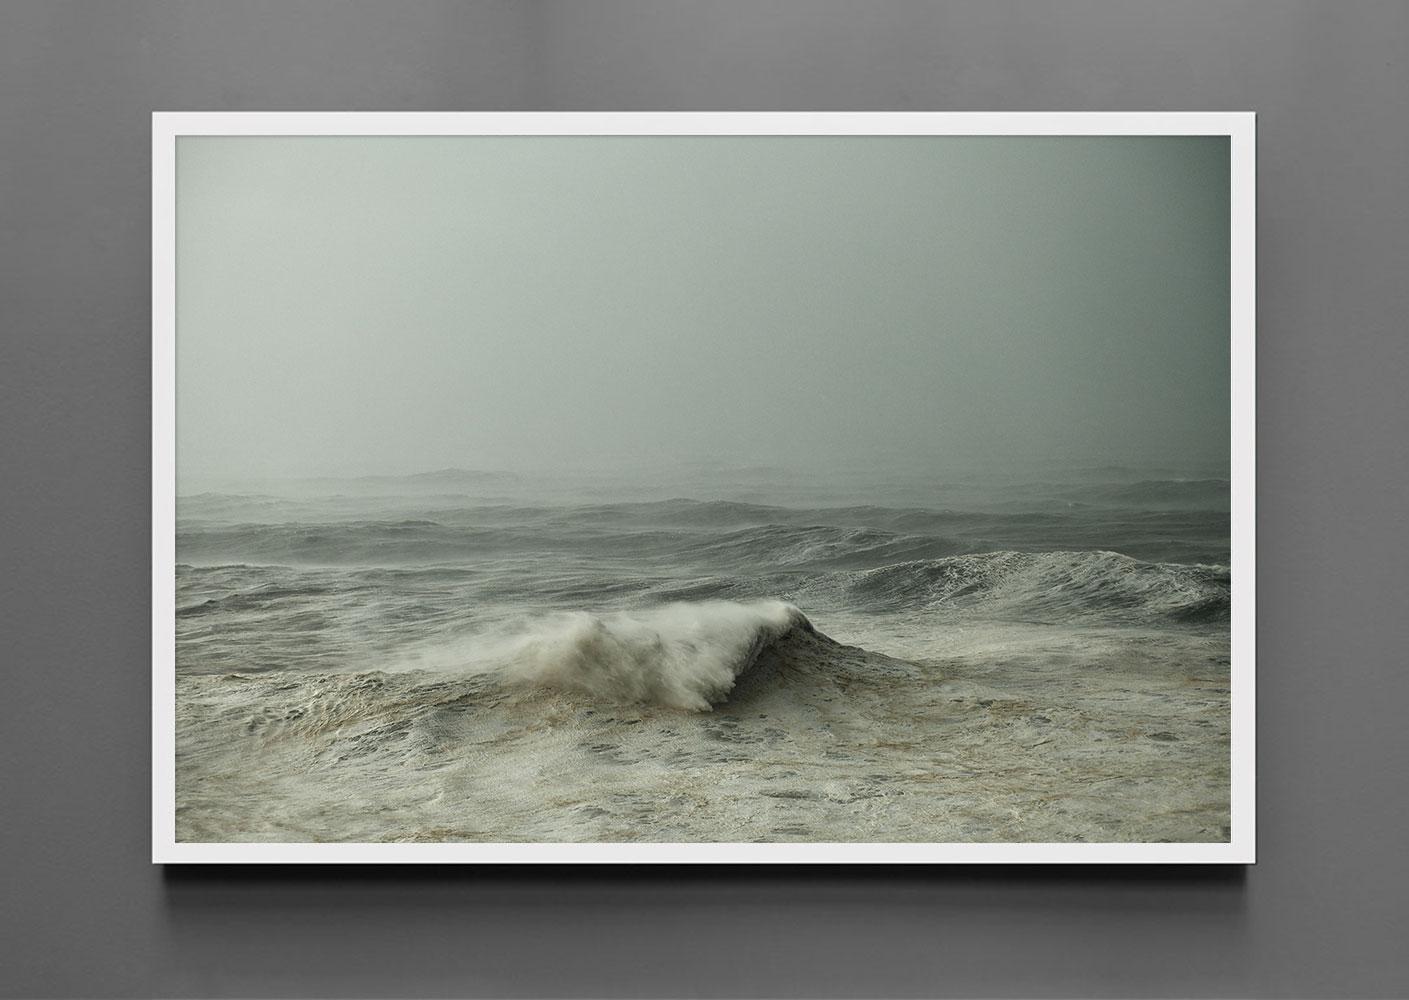 Mare 399 - Seascape photograph - Photograph by Alessandro Puccinelli